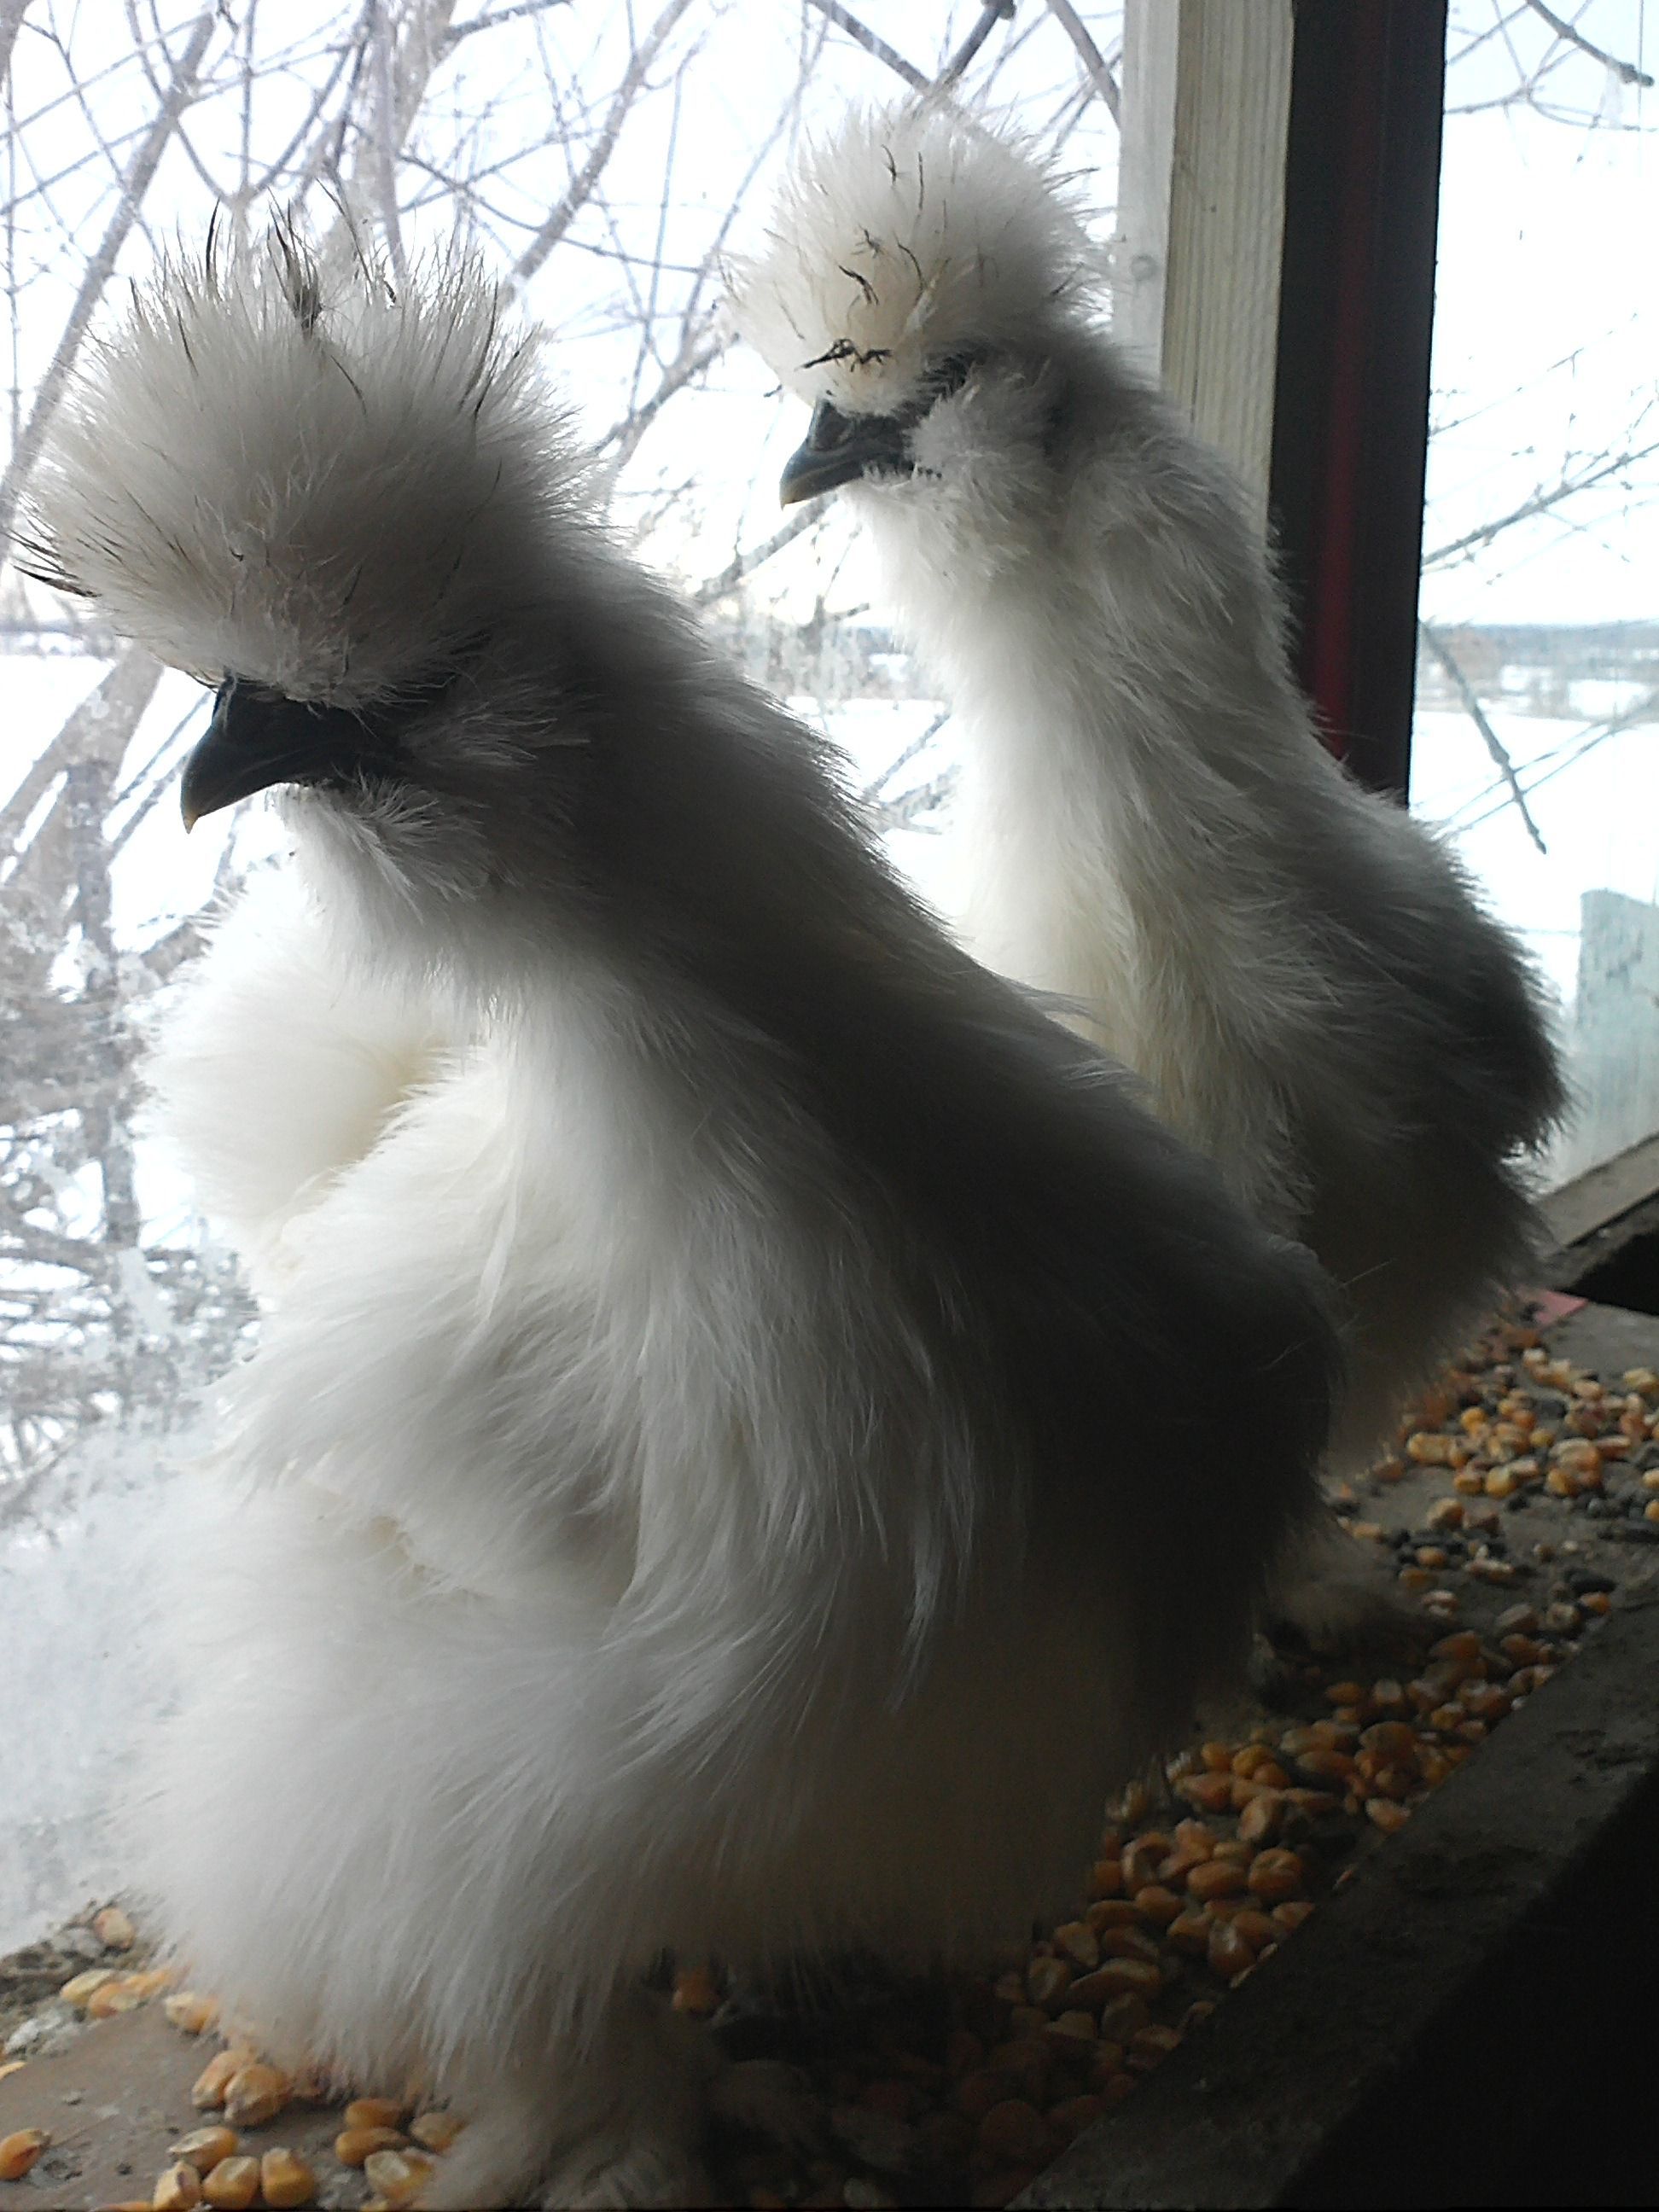 The silkies - Alice and Near are young bearded silkie mates to be. I love them - they truly are Dodos.